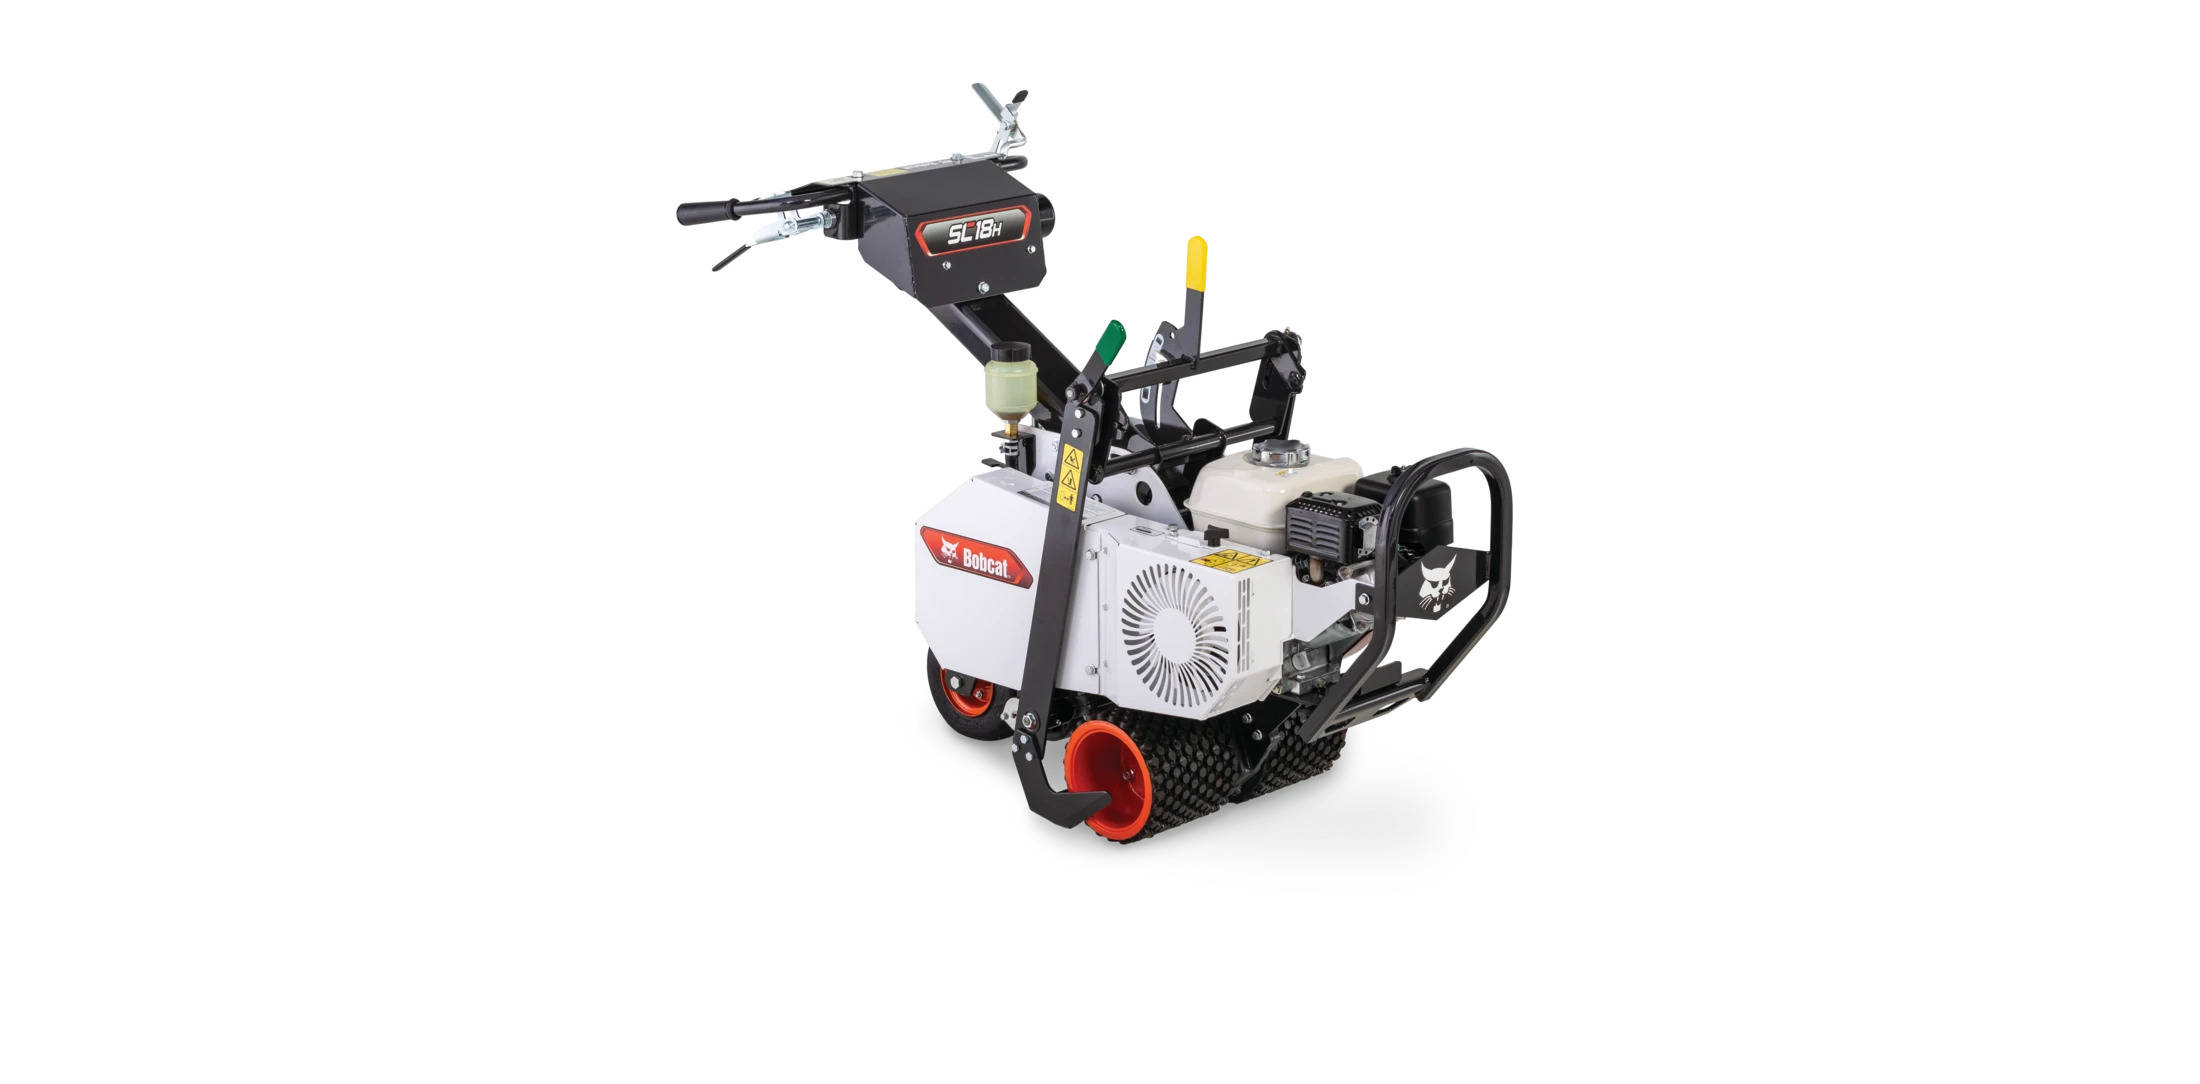 Browse Specs and more for the Bobcat SC18 Sod Cutter – Briggs & Stratton Engine - Bobcat of Huntsville